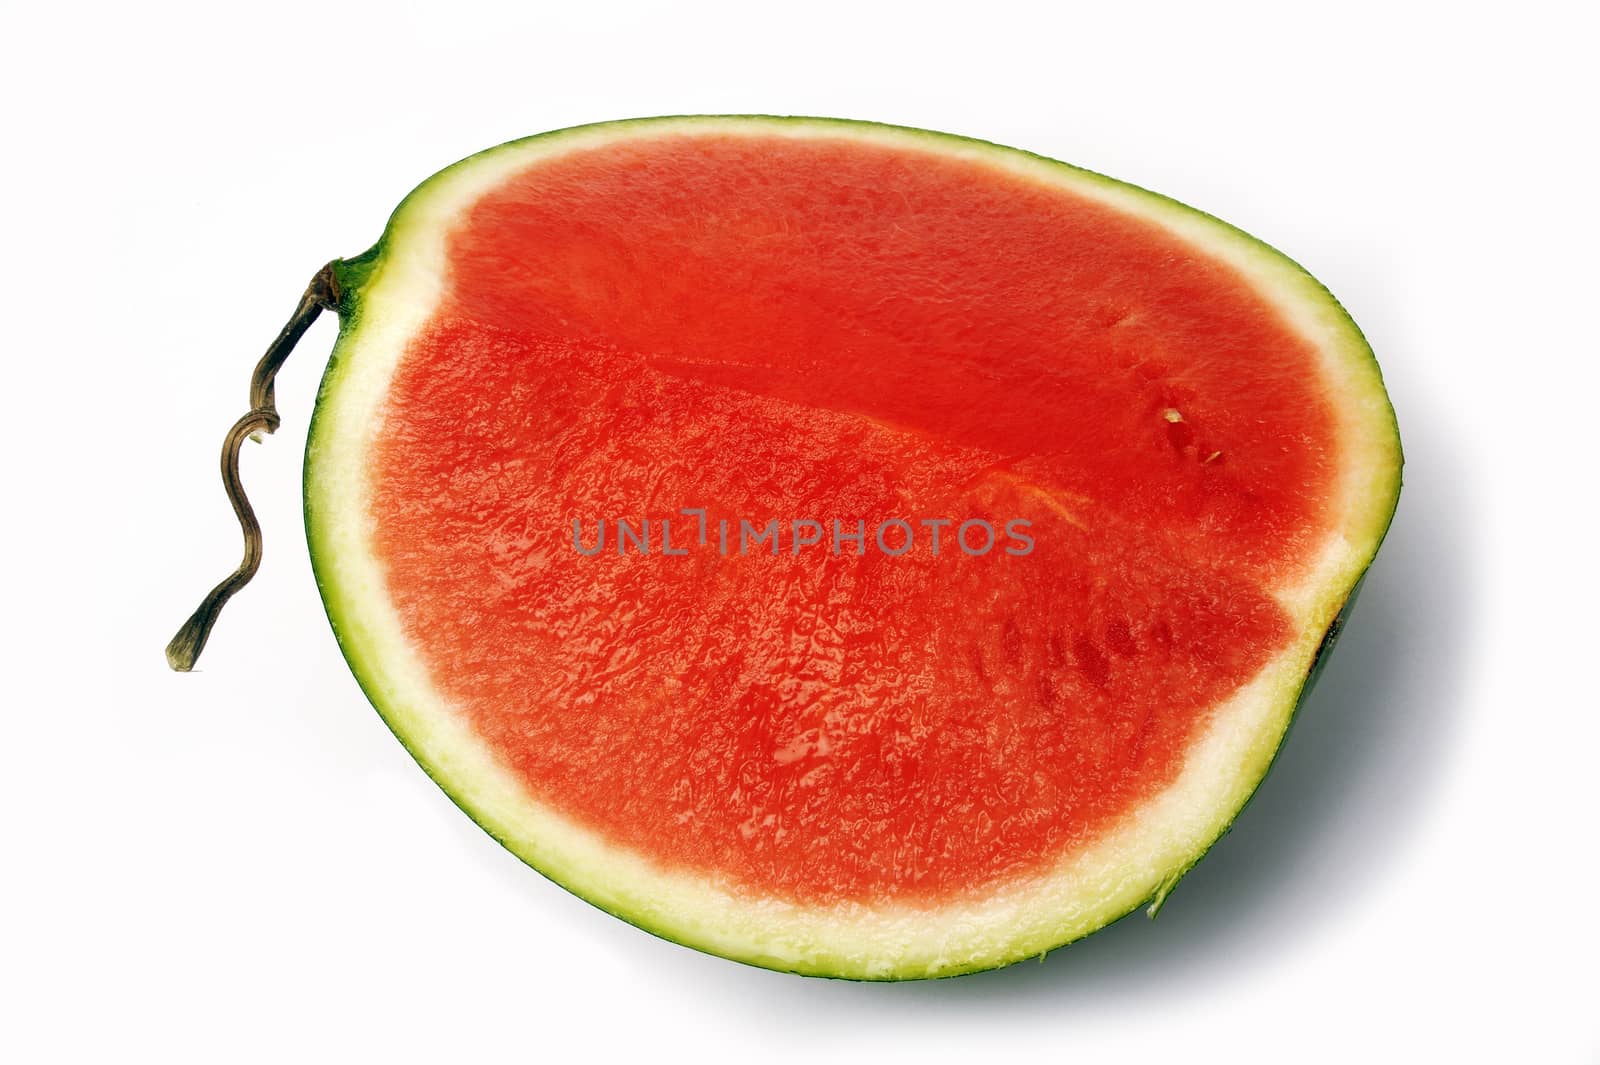 slice of watermelon isolated on white background in studio